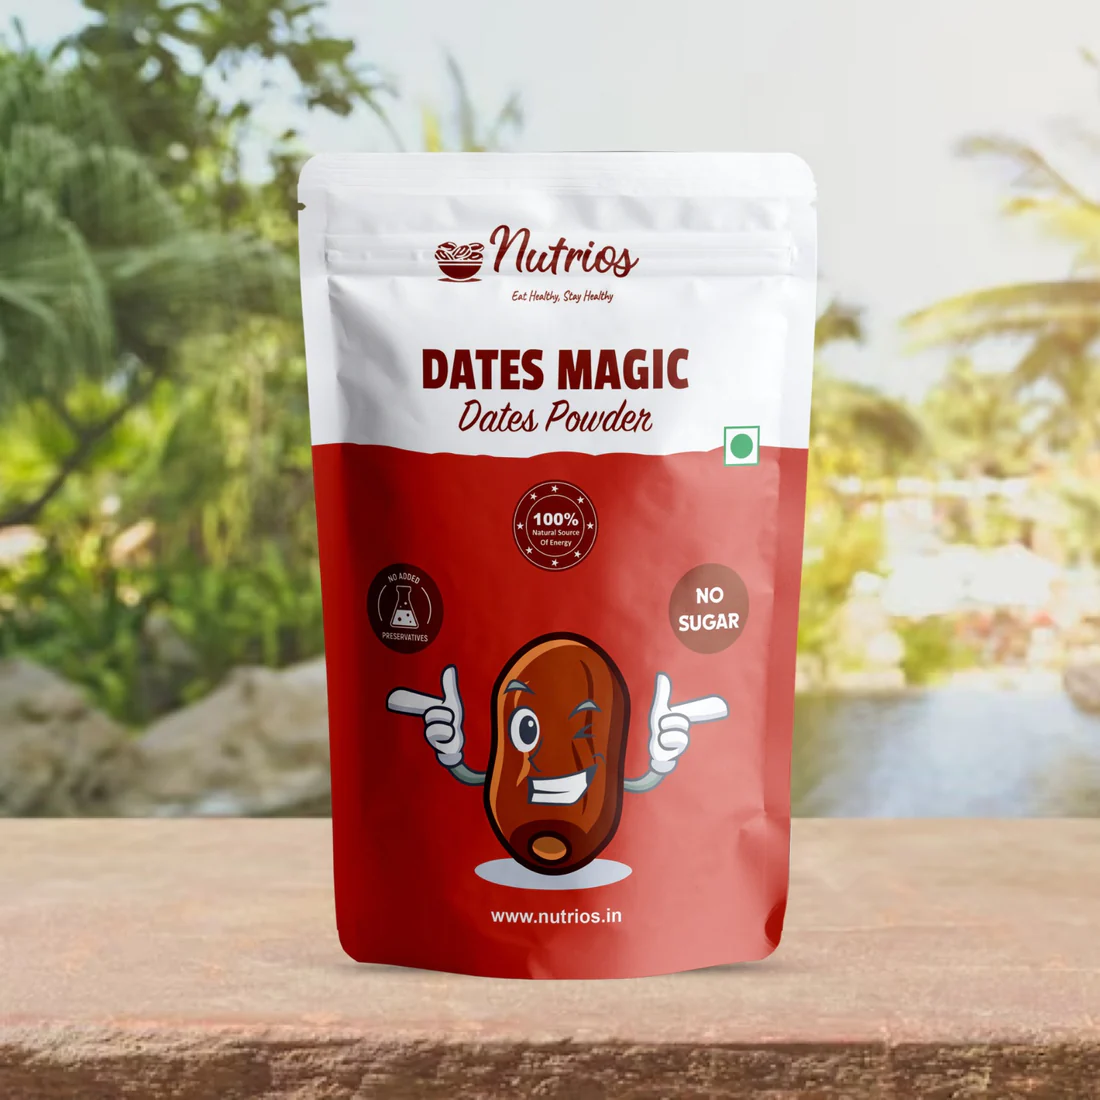 The Sweet Solution for Kids: Dates Powder as a Healthier Alternative to Harmful Sweets